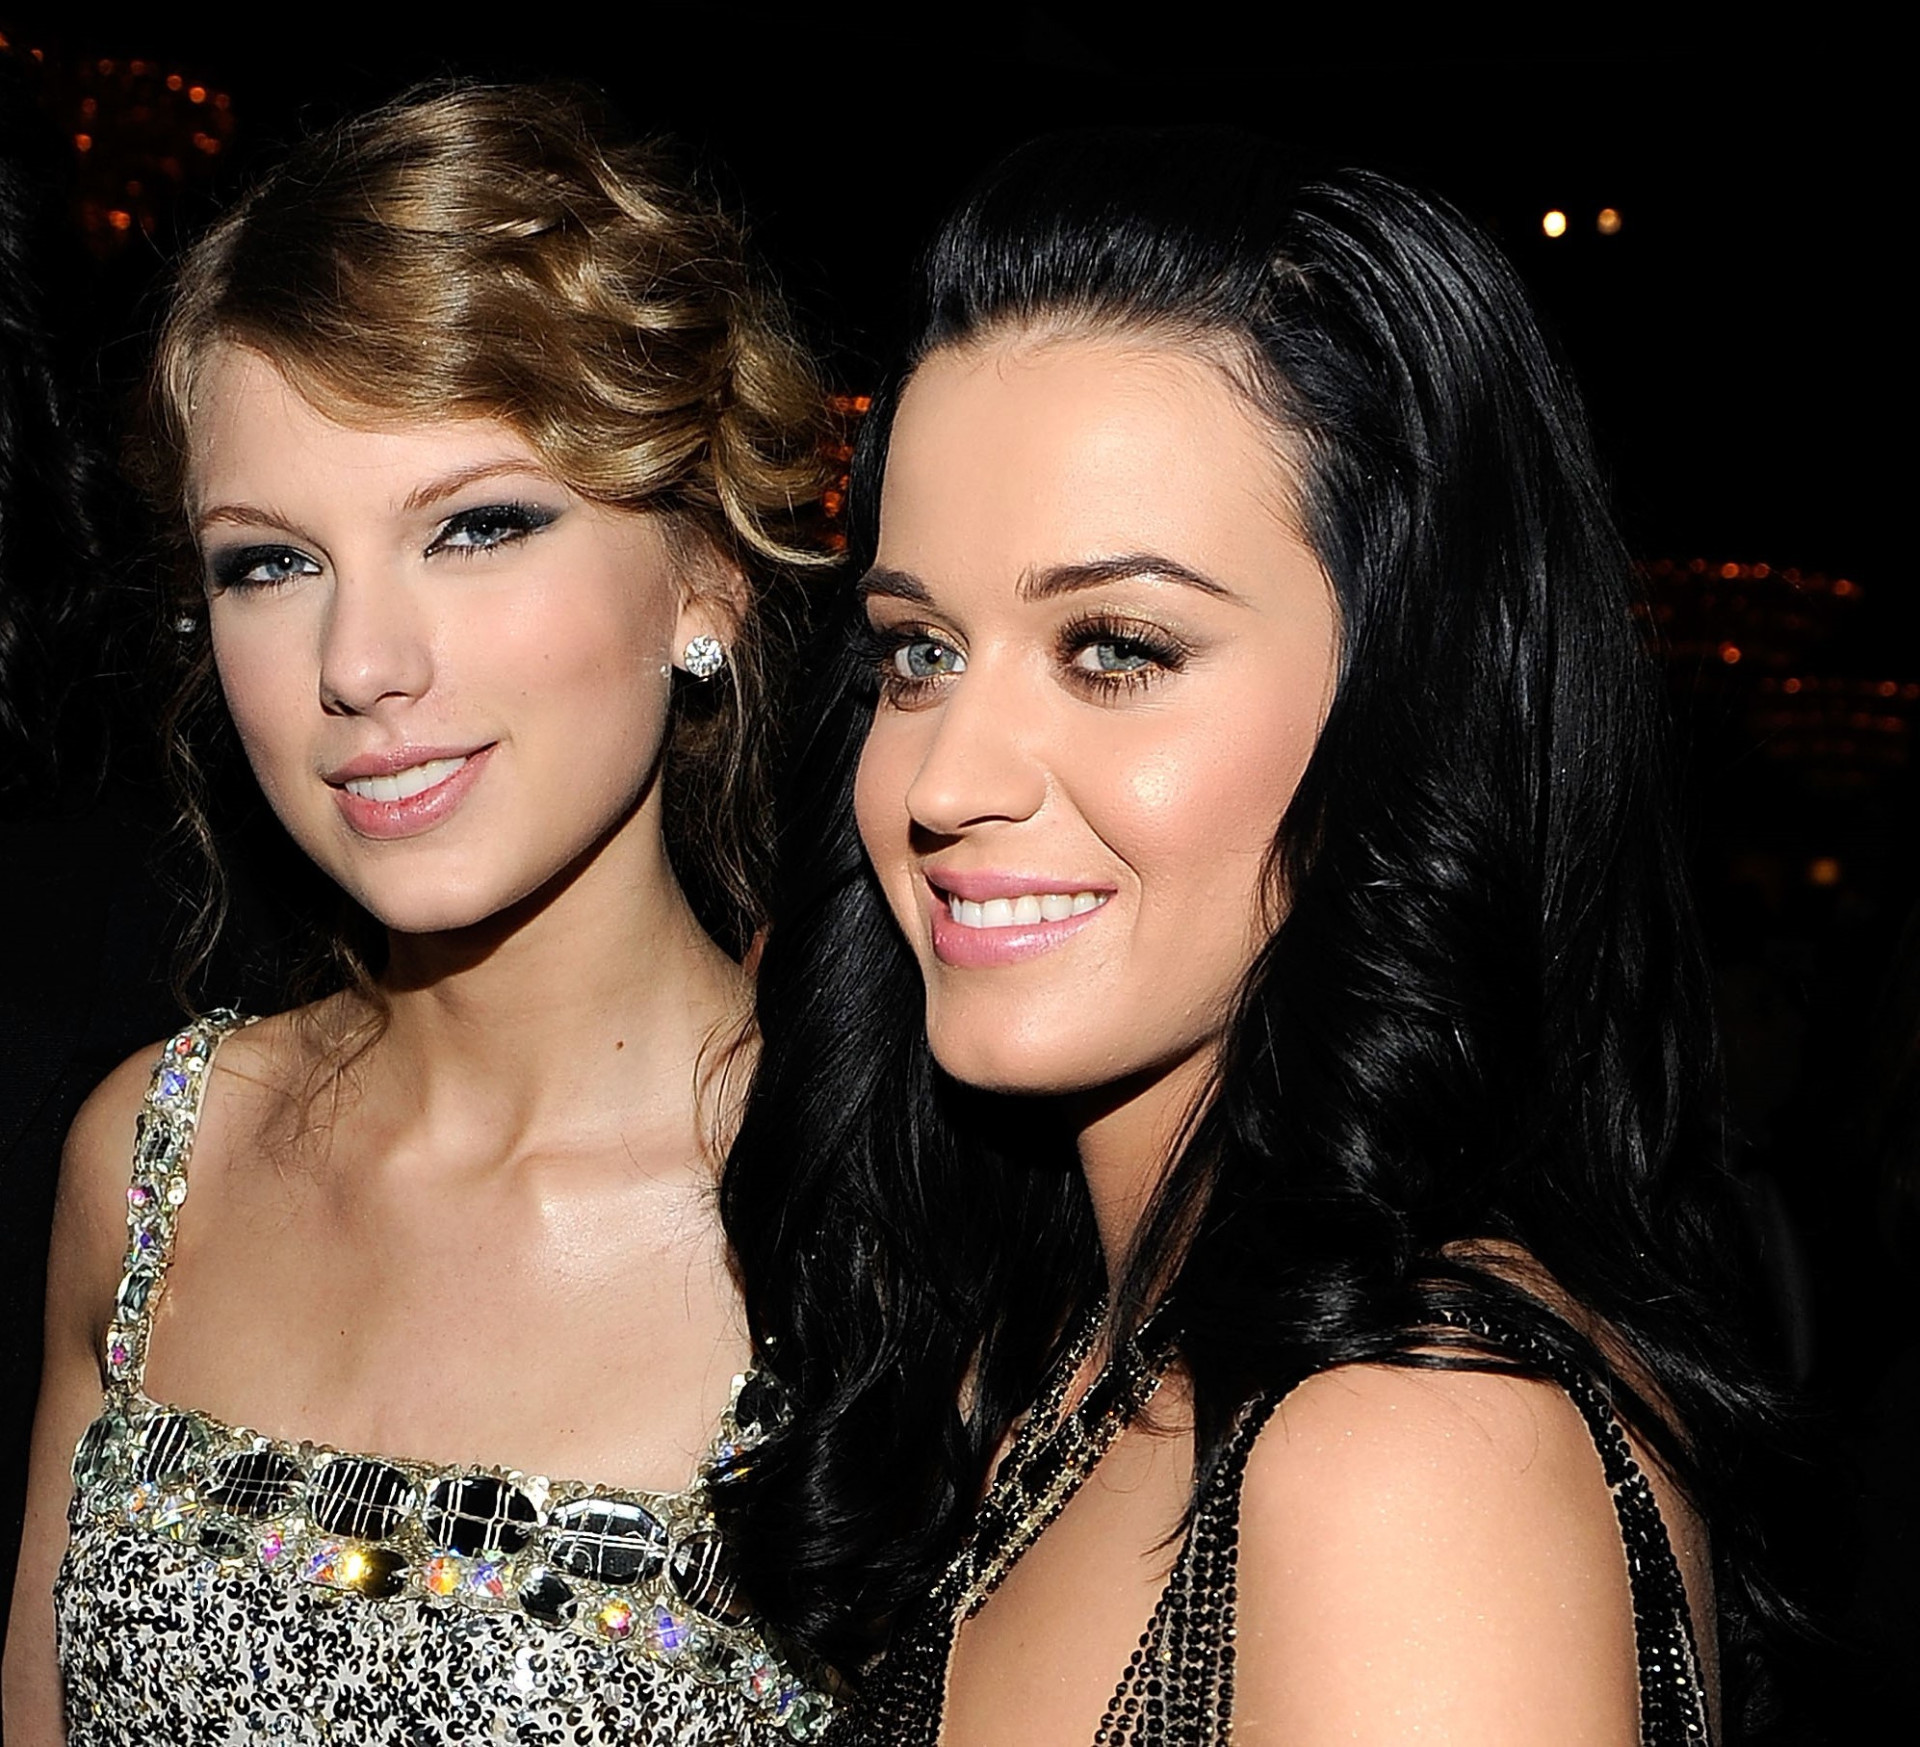 <p>The dispute began when Taylor stated in Rolling Stone that her song 'Bad Blood' was inspired by a former pop singer friend. However, in 2019, they reconciled.</p>